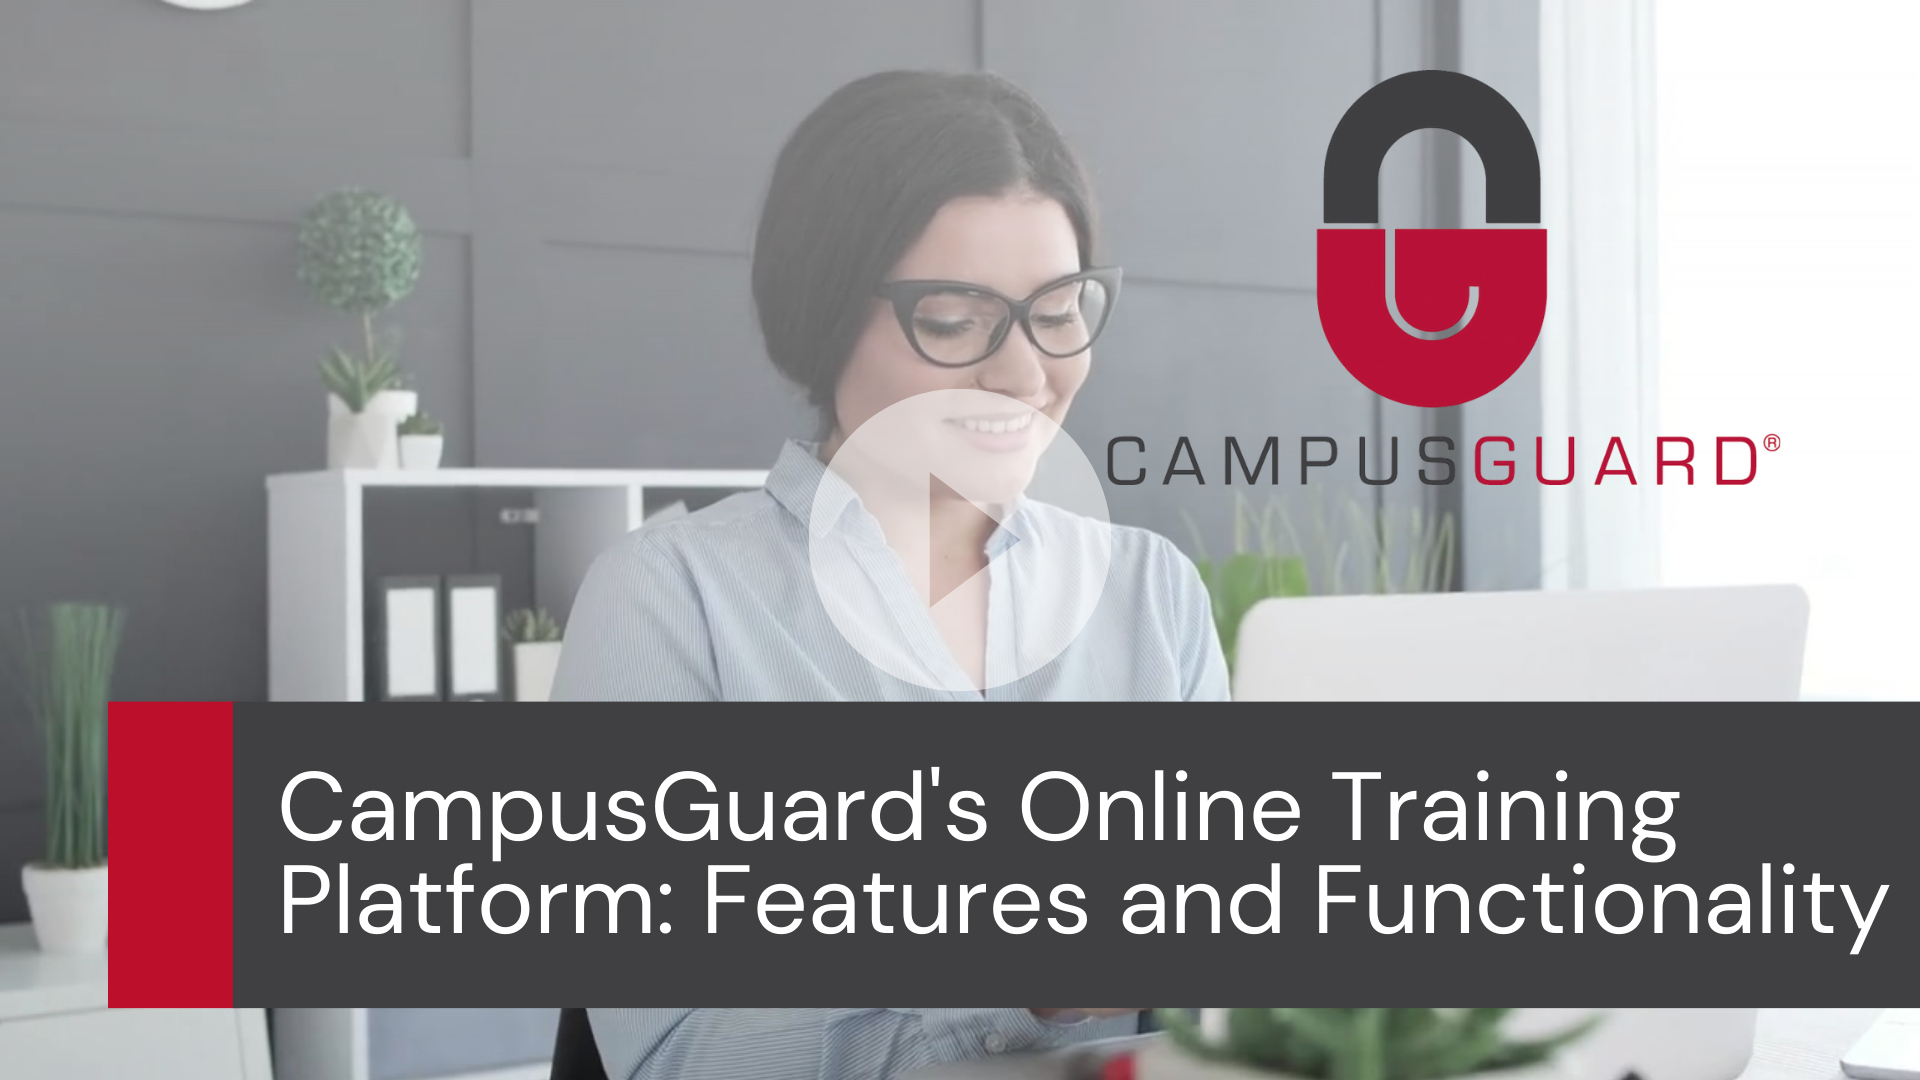 Campusguard's Online Training Platform: Features and Functionality